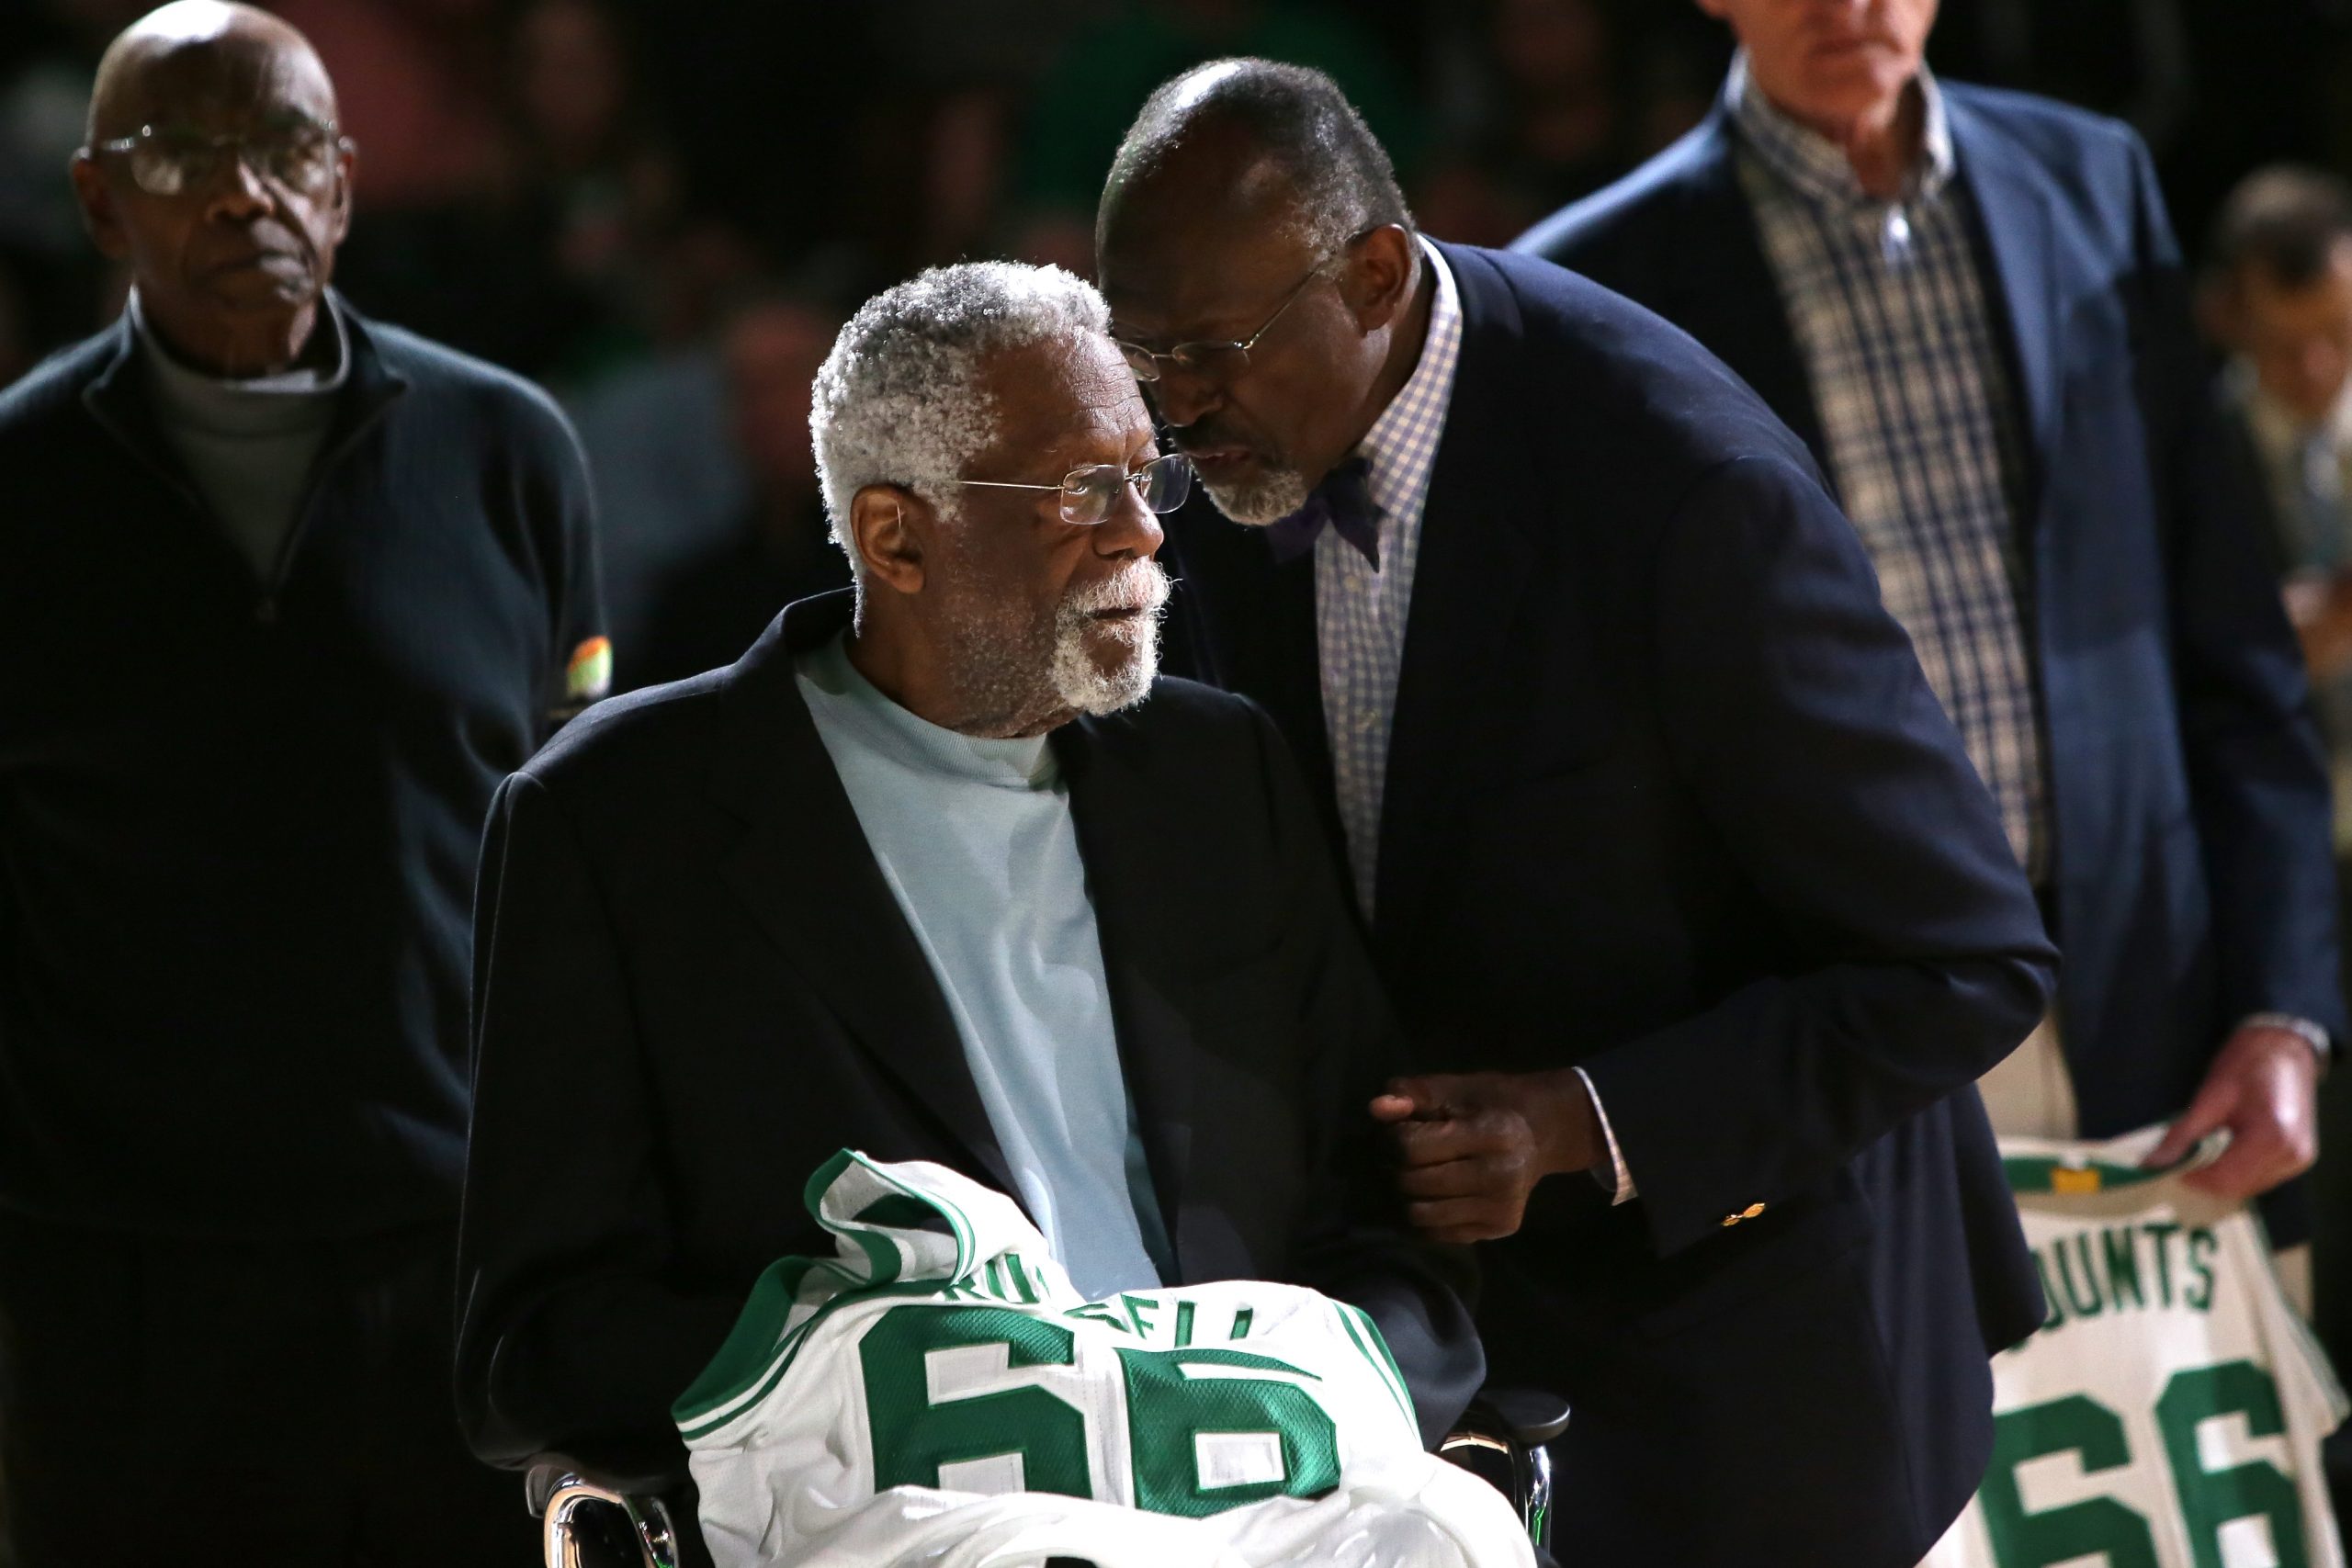 Bill Russell is honored at halftime of the game between the Boston Celtics and the Miami Heat.